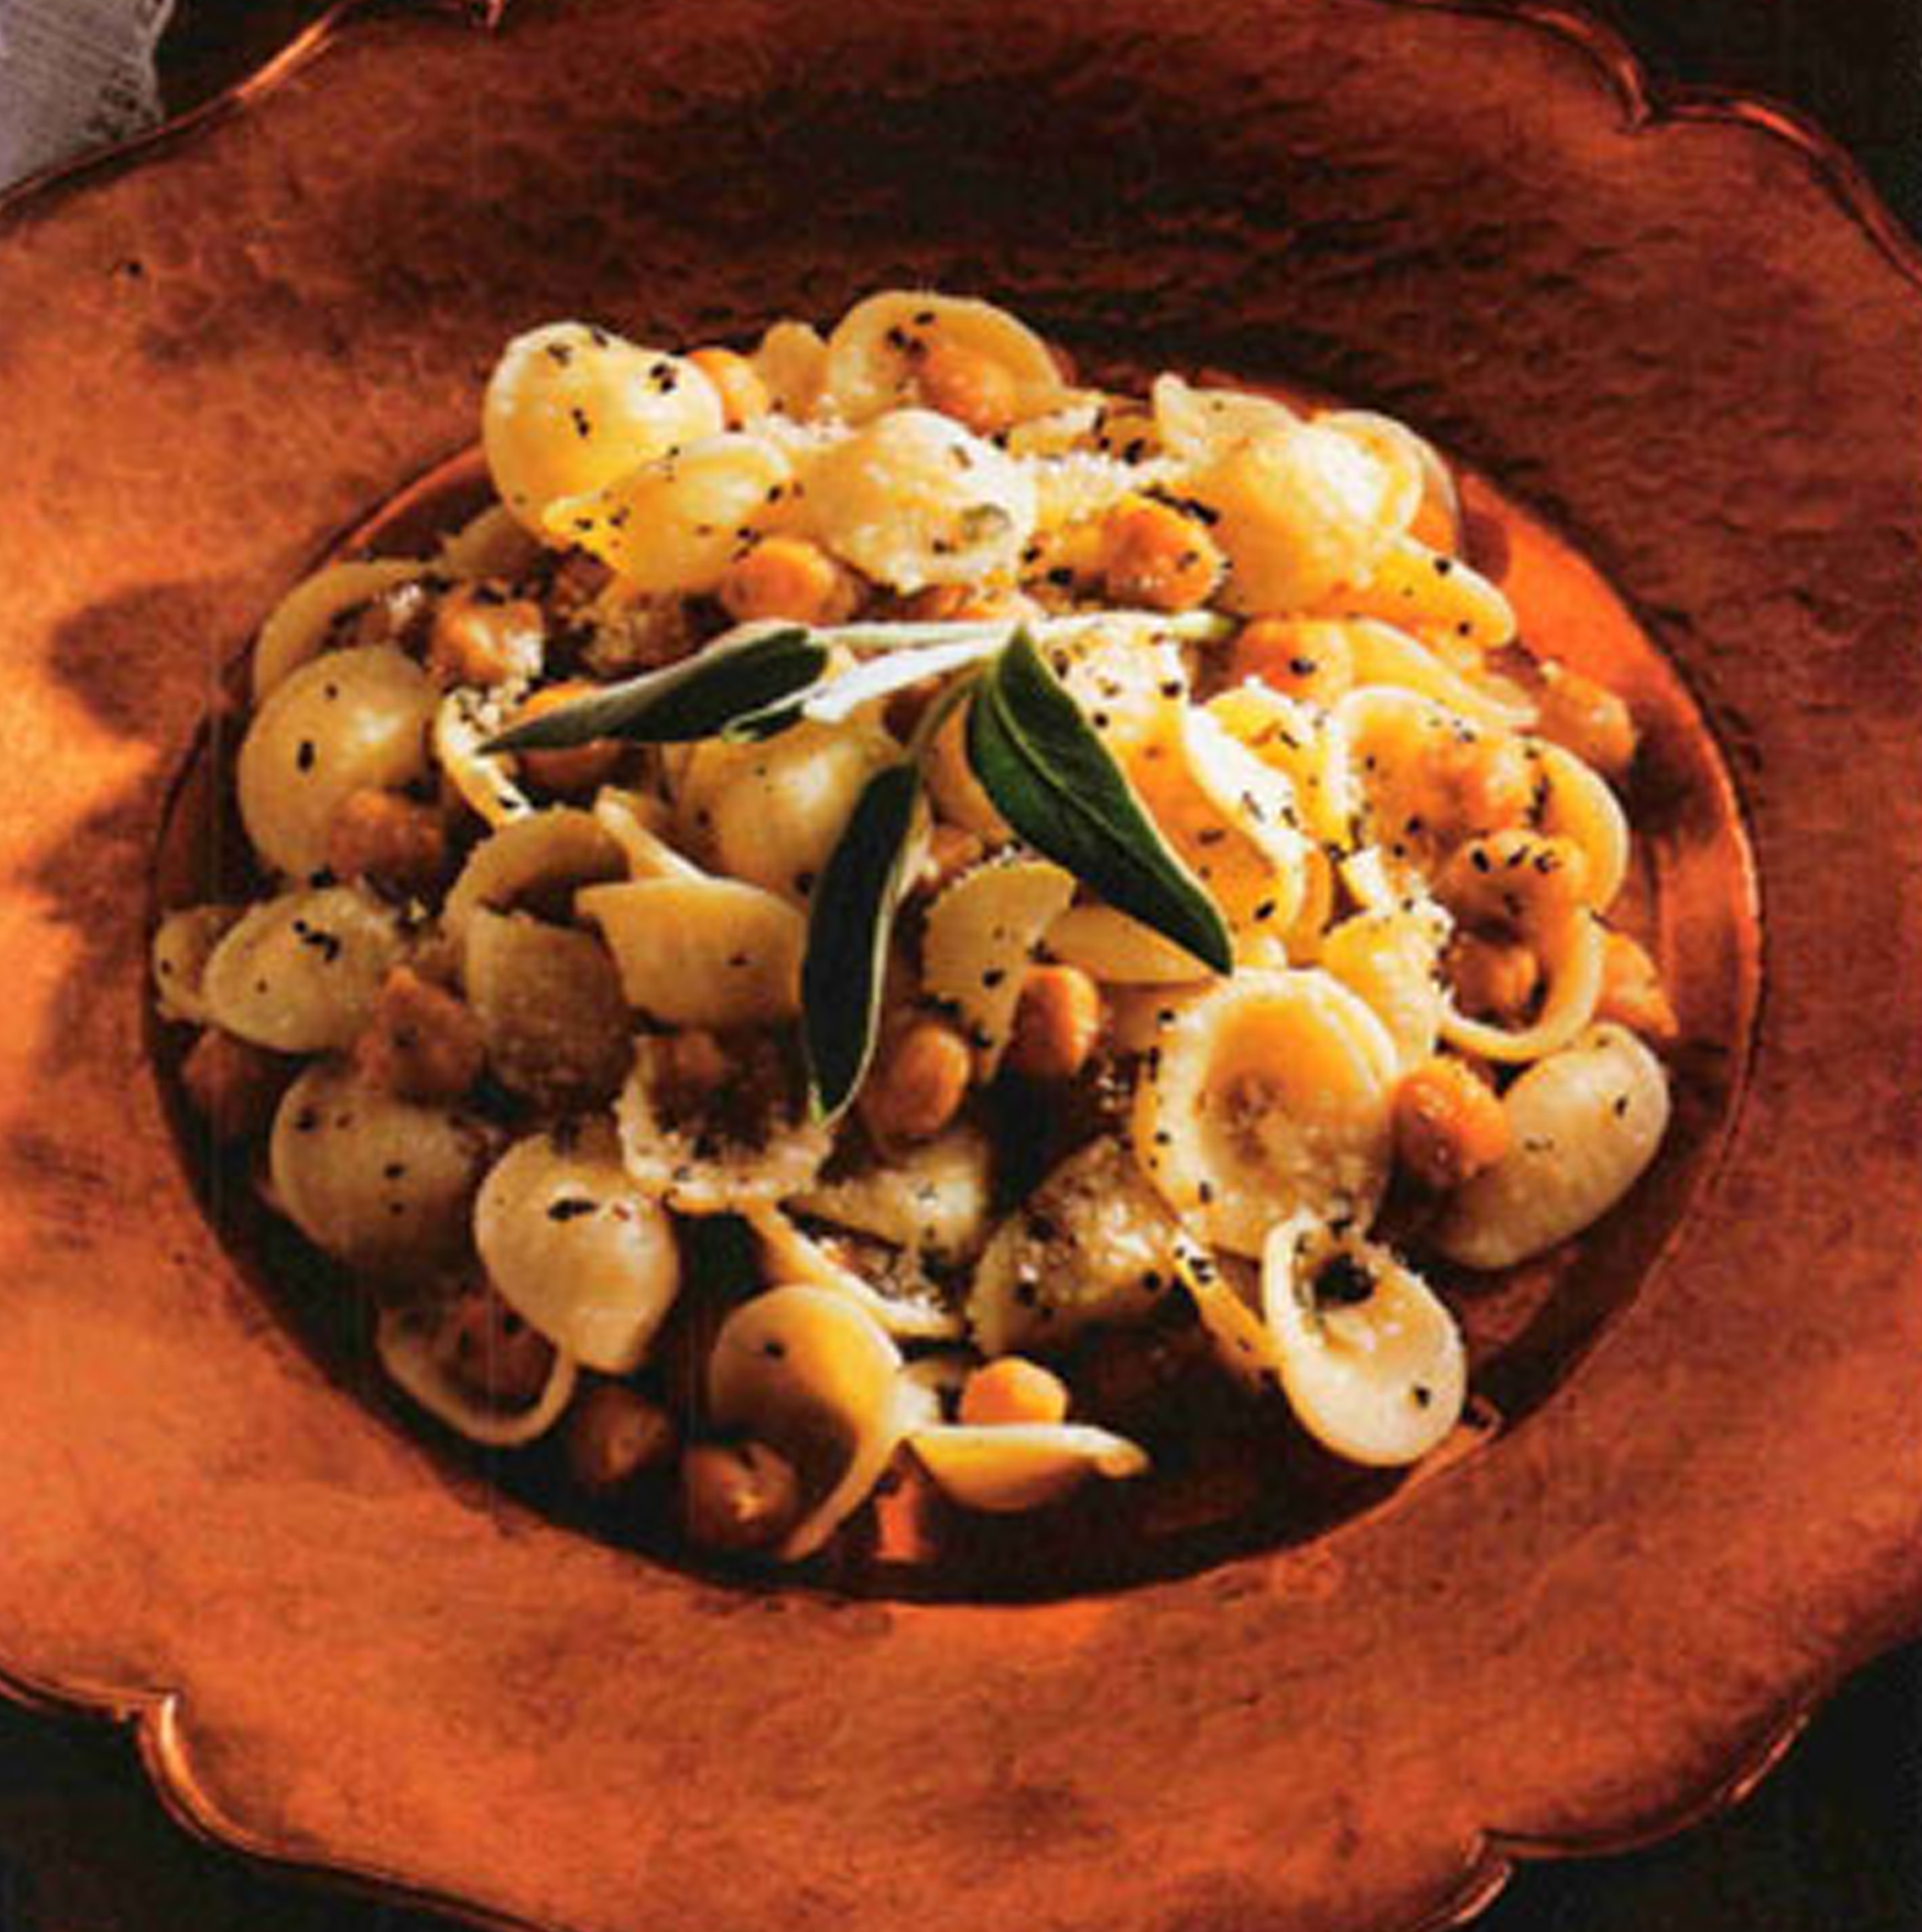 Orecchiette with Fried Chickpeas & Black Pepper